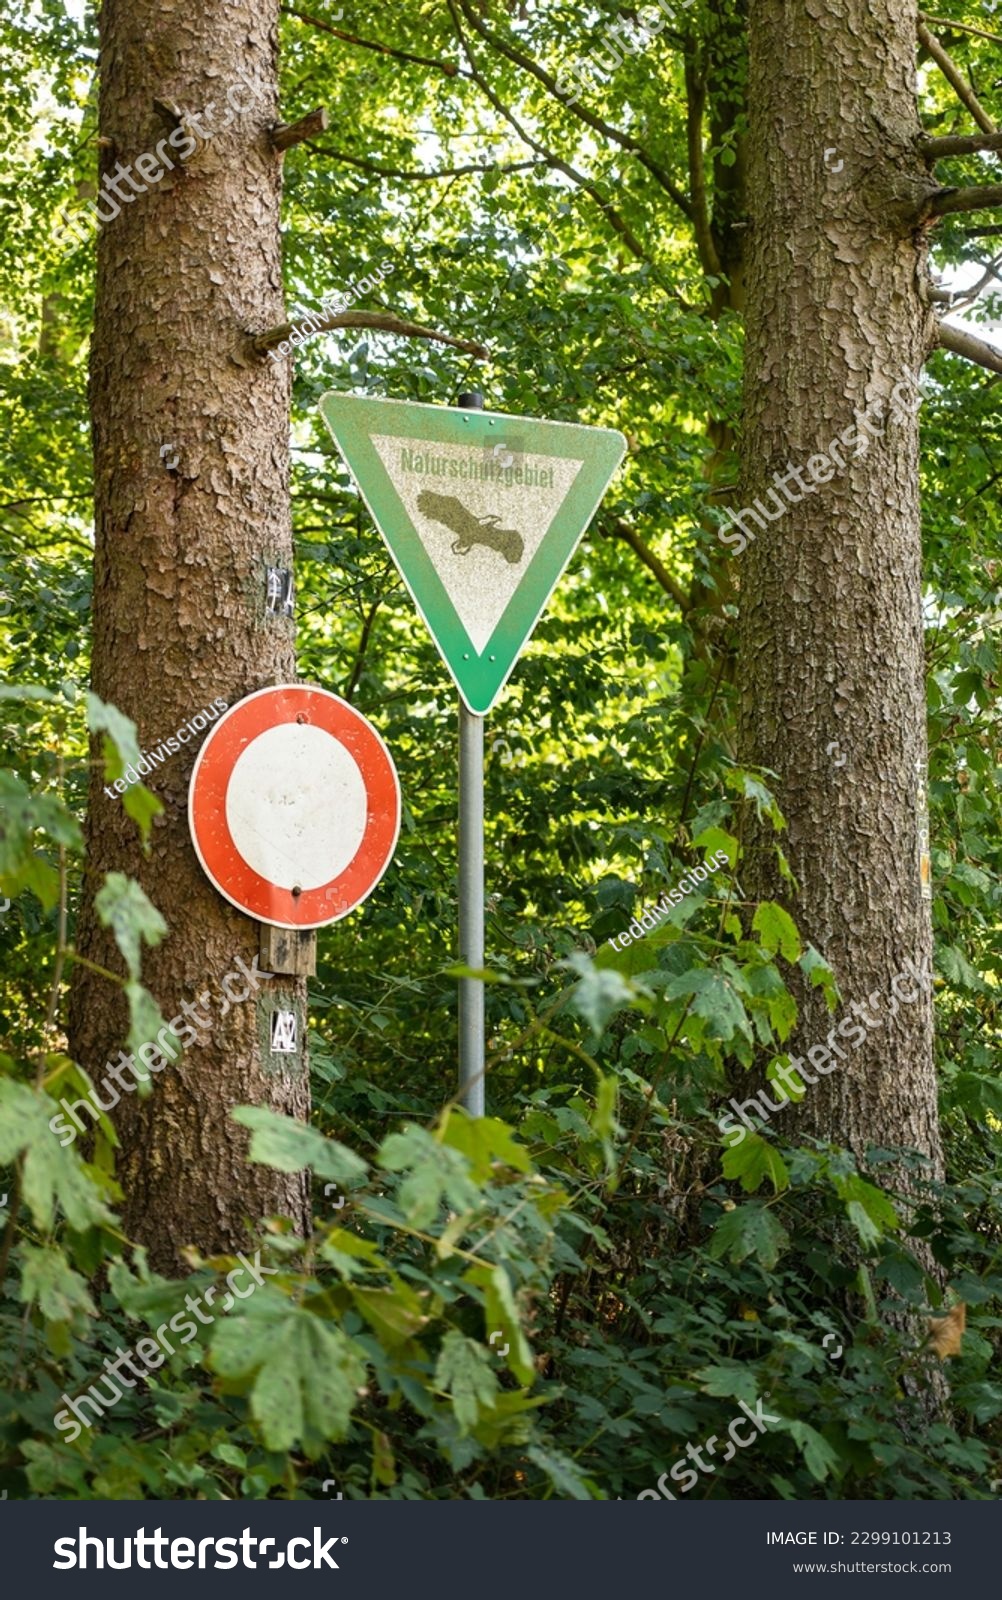 Signs "Naturschutzgebiet" and "No entry!" on the edge of a forest, marking a nature reserve and conservation area, Germany #2299101213